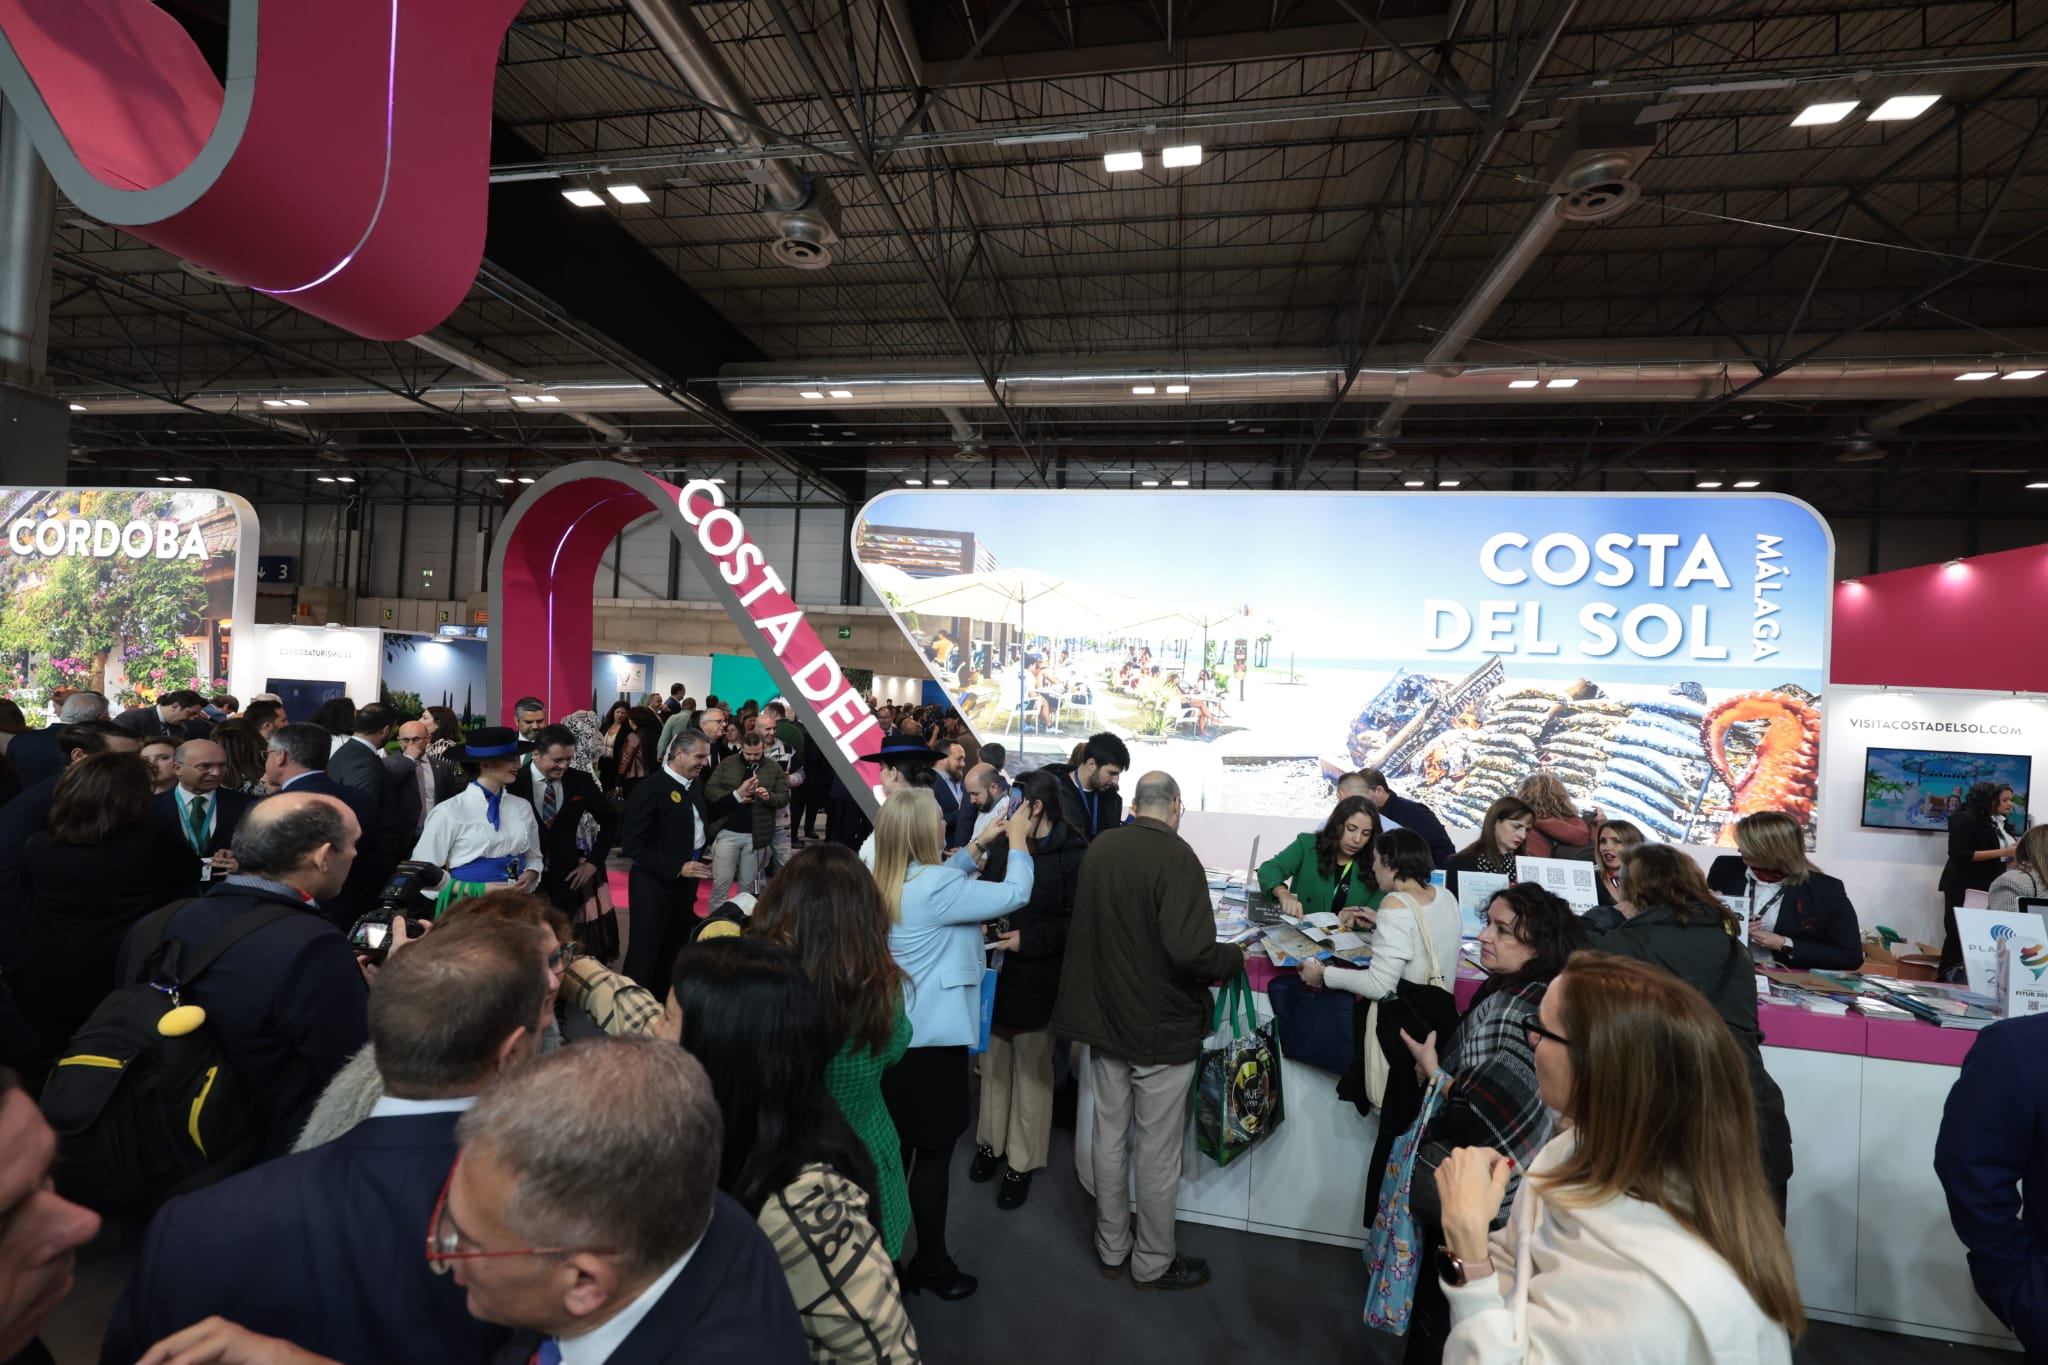 The Costa del Sol's presence during the first day of Fitur